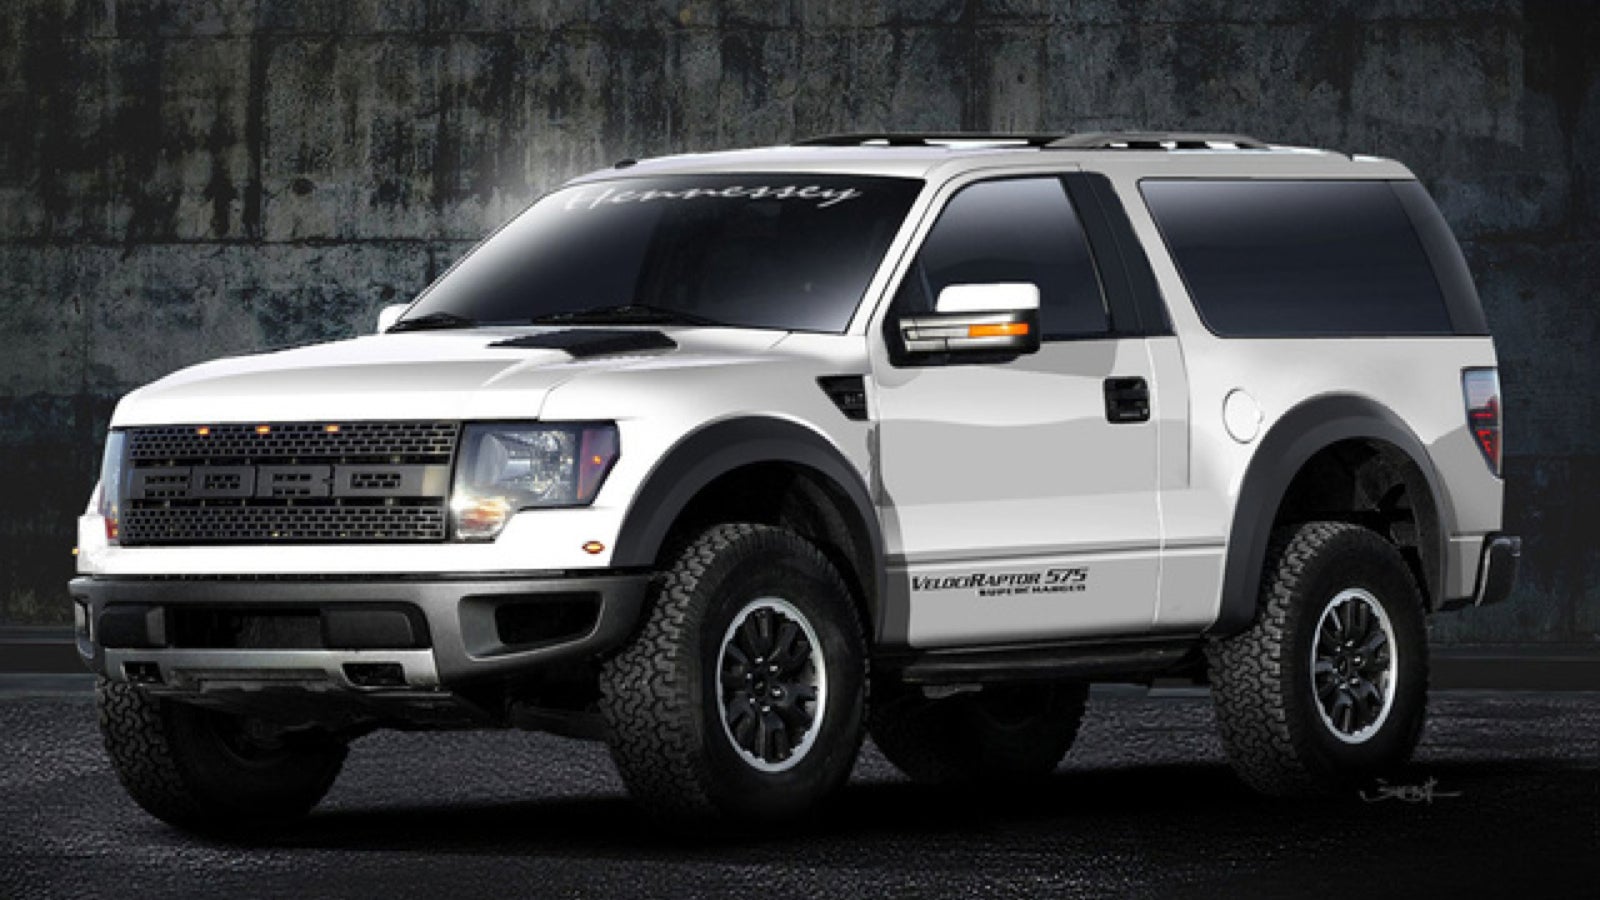 These Are The 2015 Ford Broncos Jalopnik Readers Want